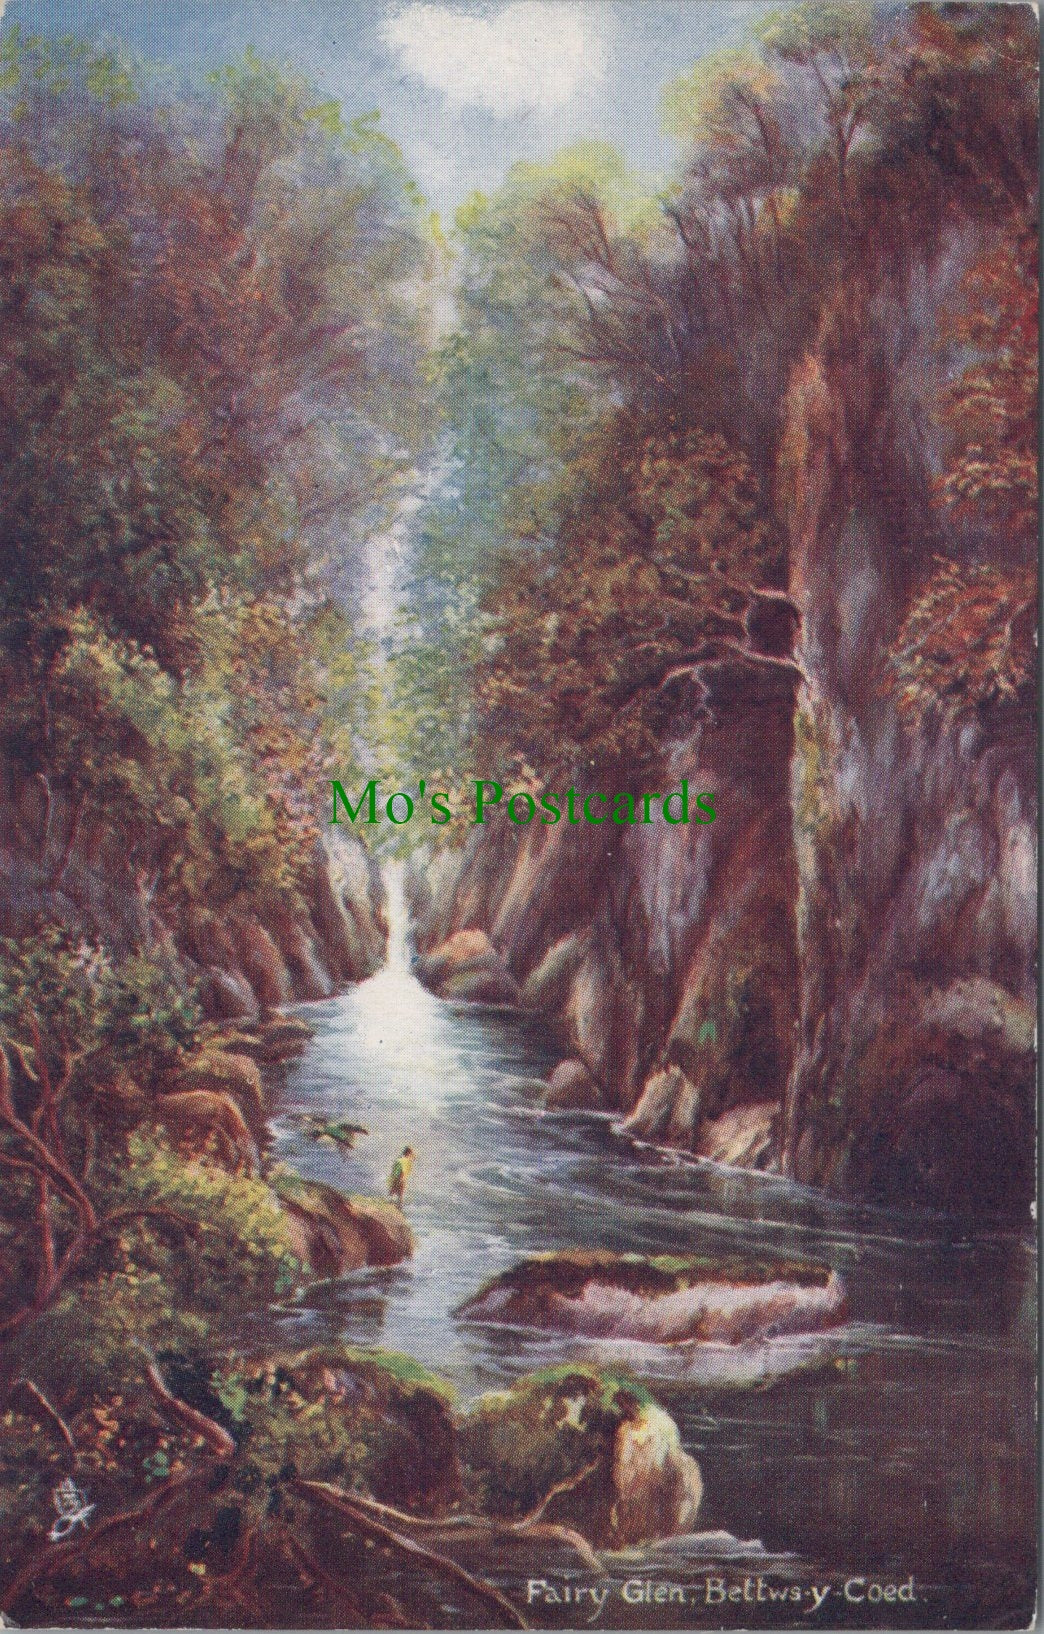 Wales Postcard - Artist View of Fairy Glen, Betws-Y-Coed DC992